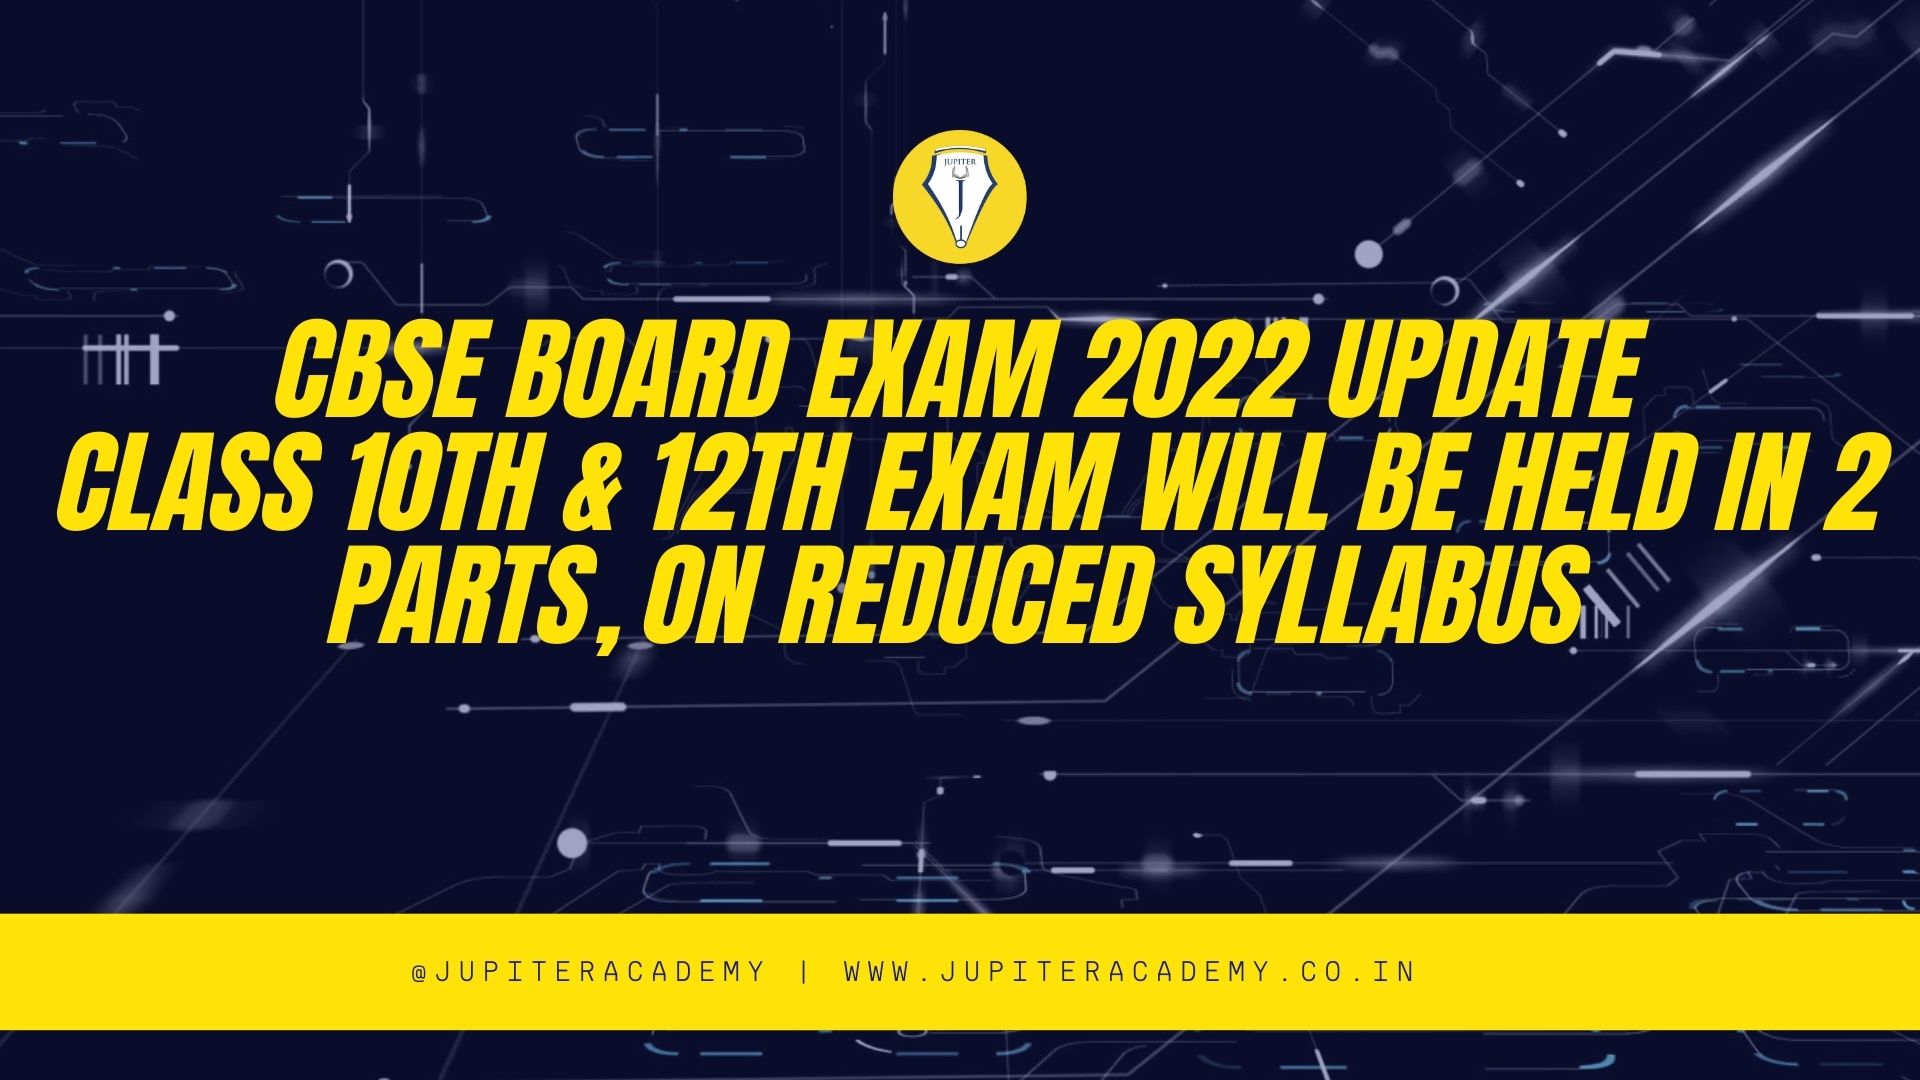 You are currently viewing CBSE Board Exam 2022 Update: Class 10th & 12th Exam will be held in 2 Parts, on Reduced Syllabus